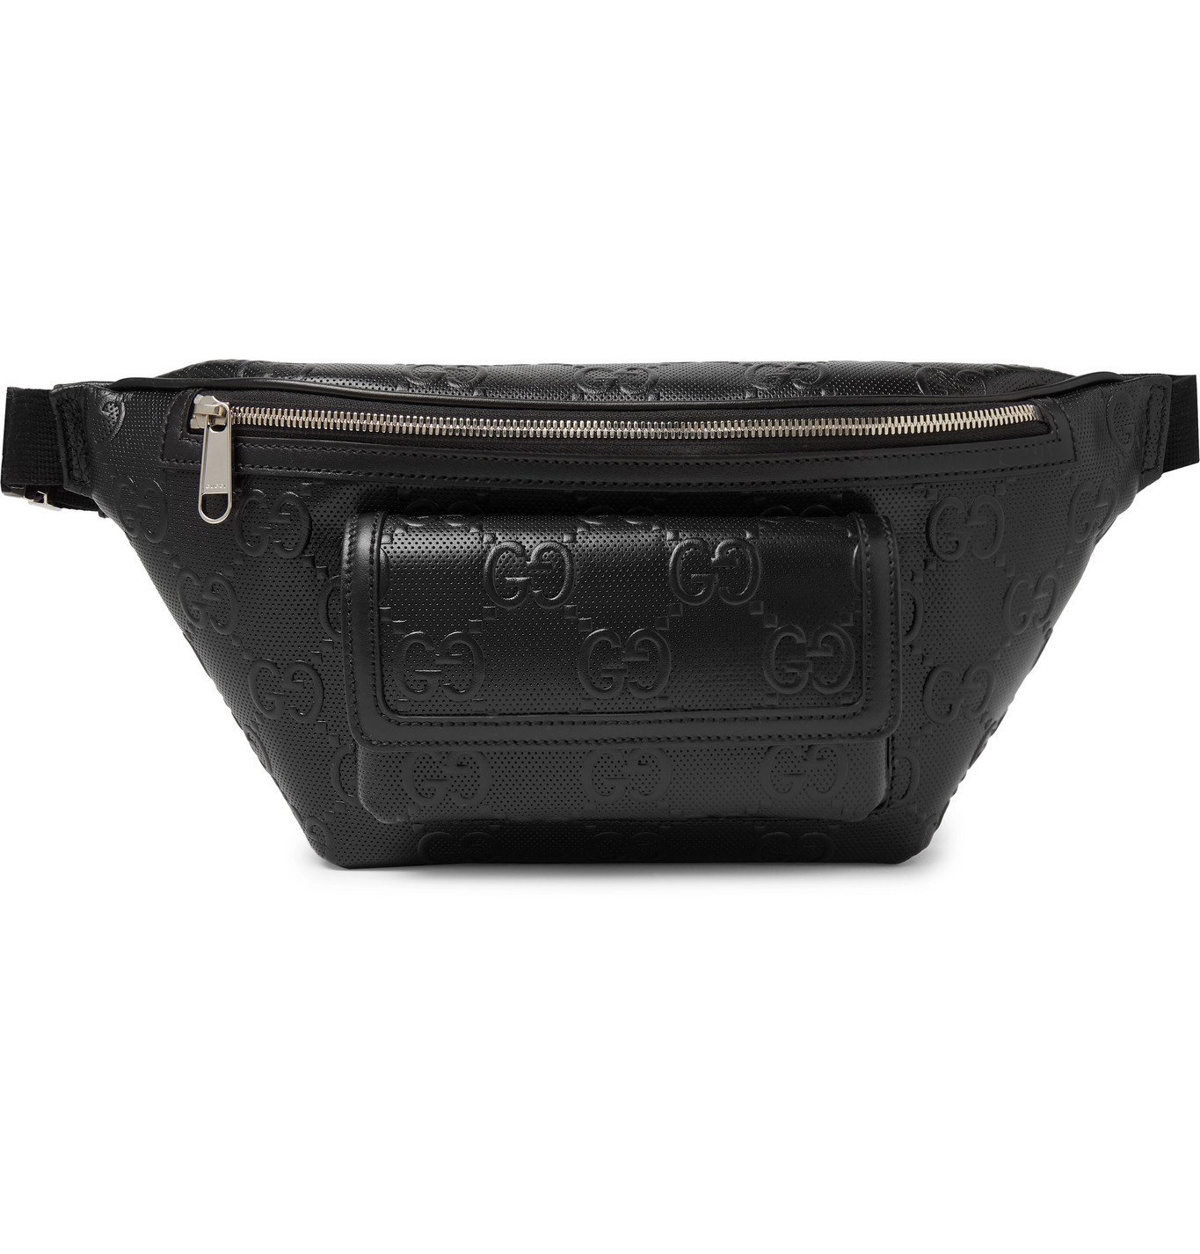 GUCCI - Logo-Embossed Perforated Leather Belt Bag - Black Gucci